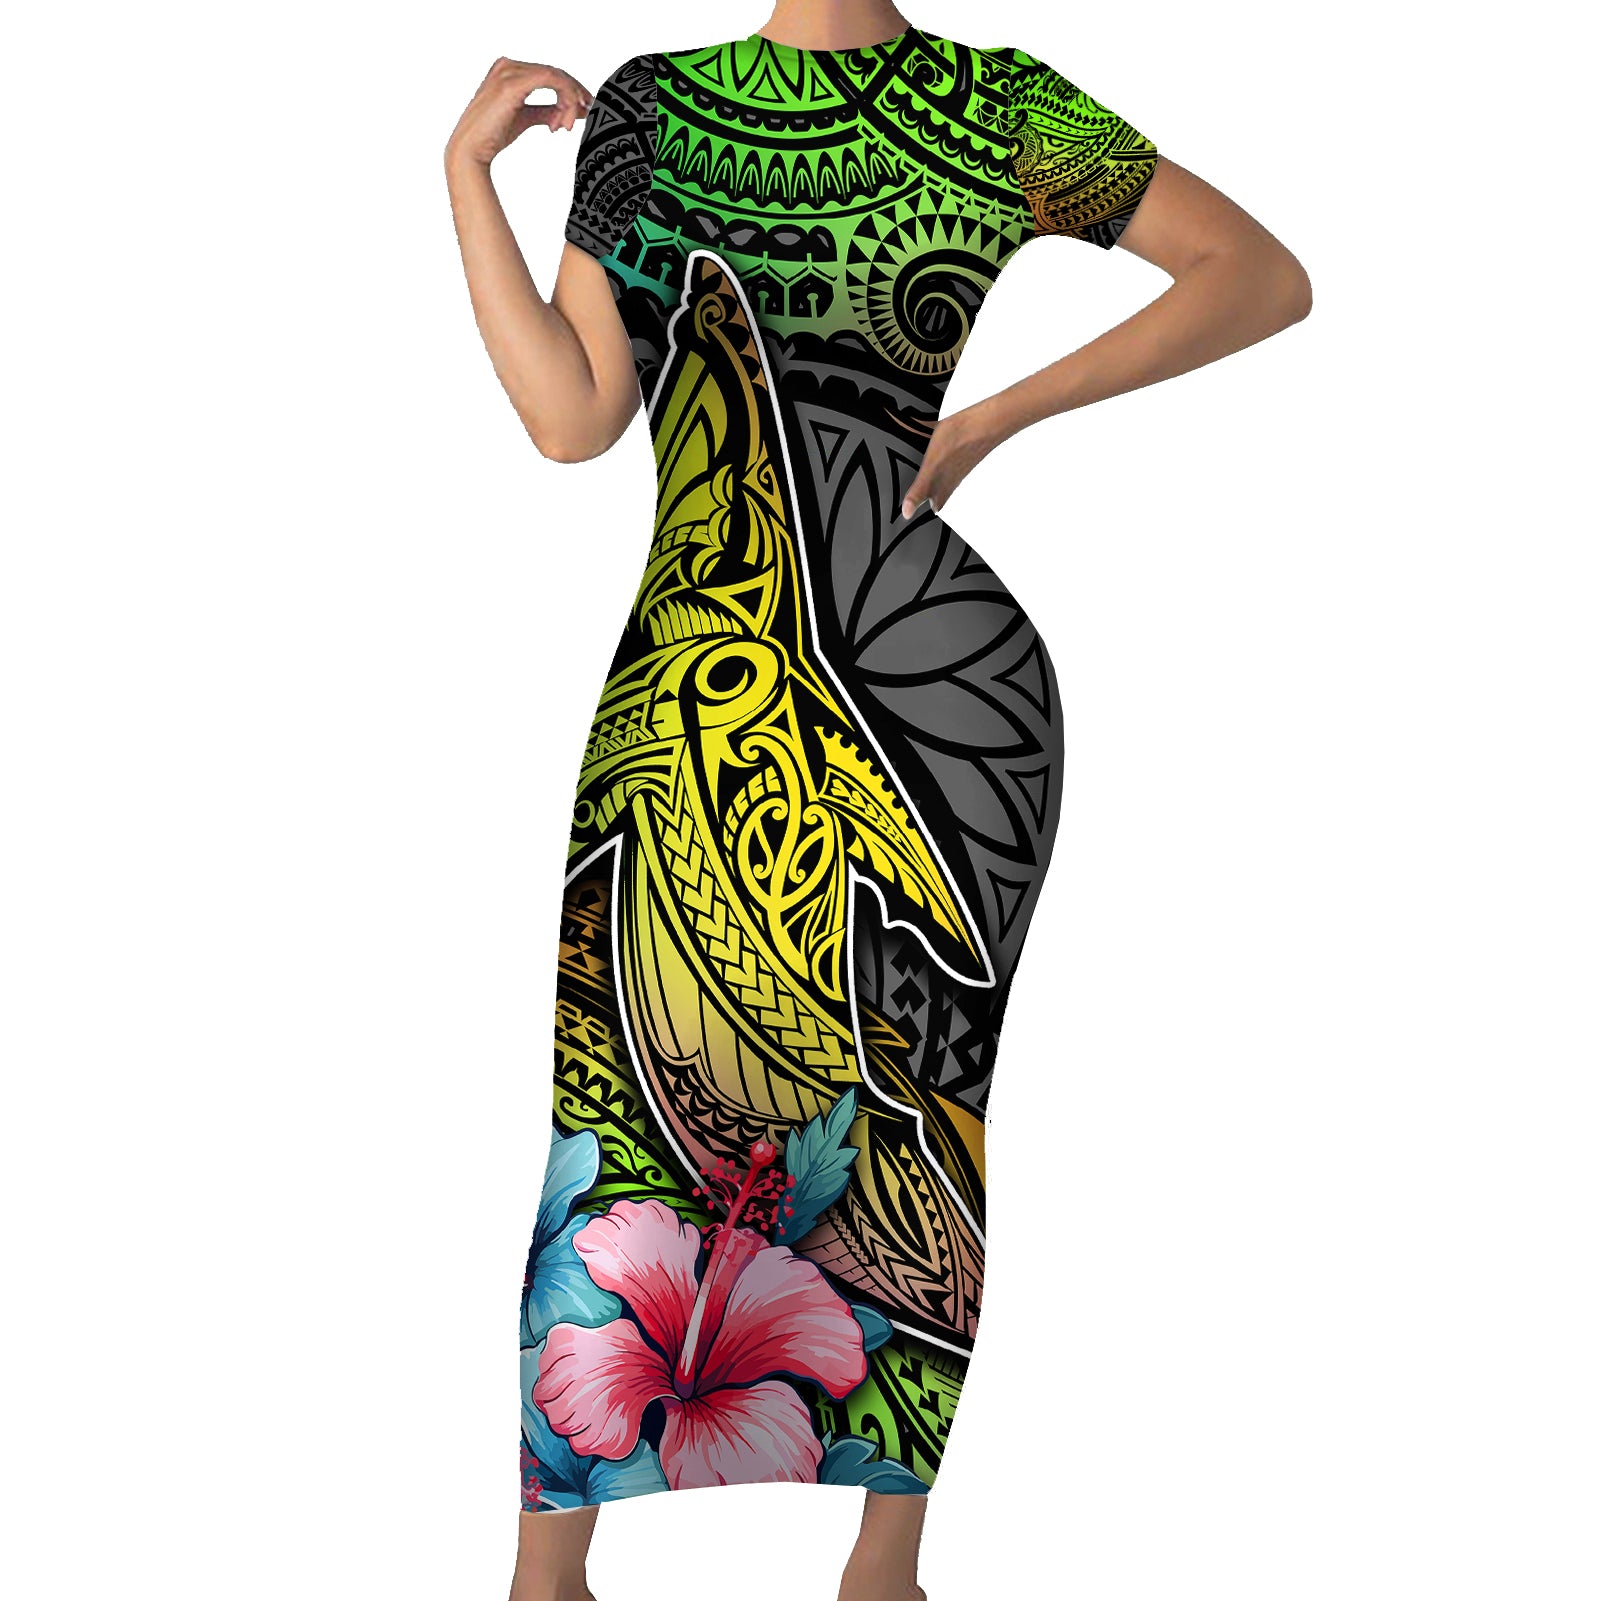 Polynesian Short Sleeve Bodycon Dress Whales and Compass Gradient Pattern TS04 Long Dress Gradient - Polynesian Pride